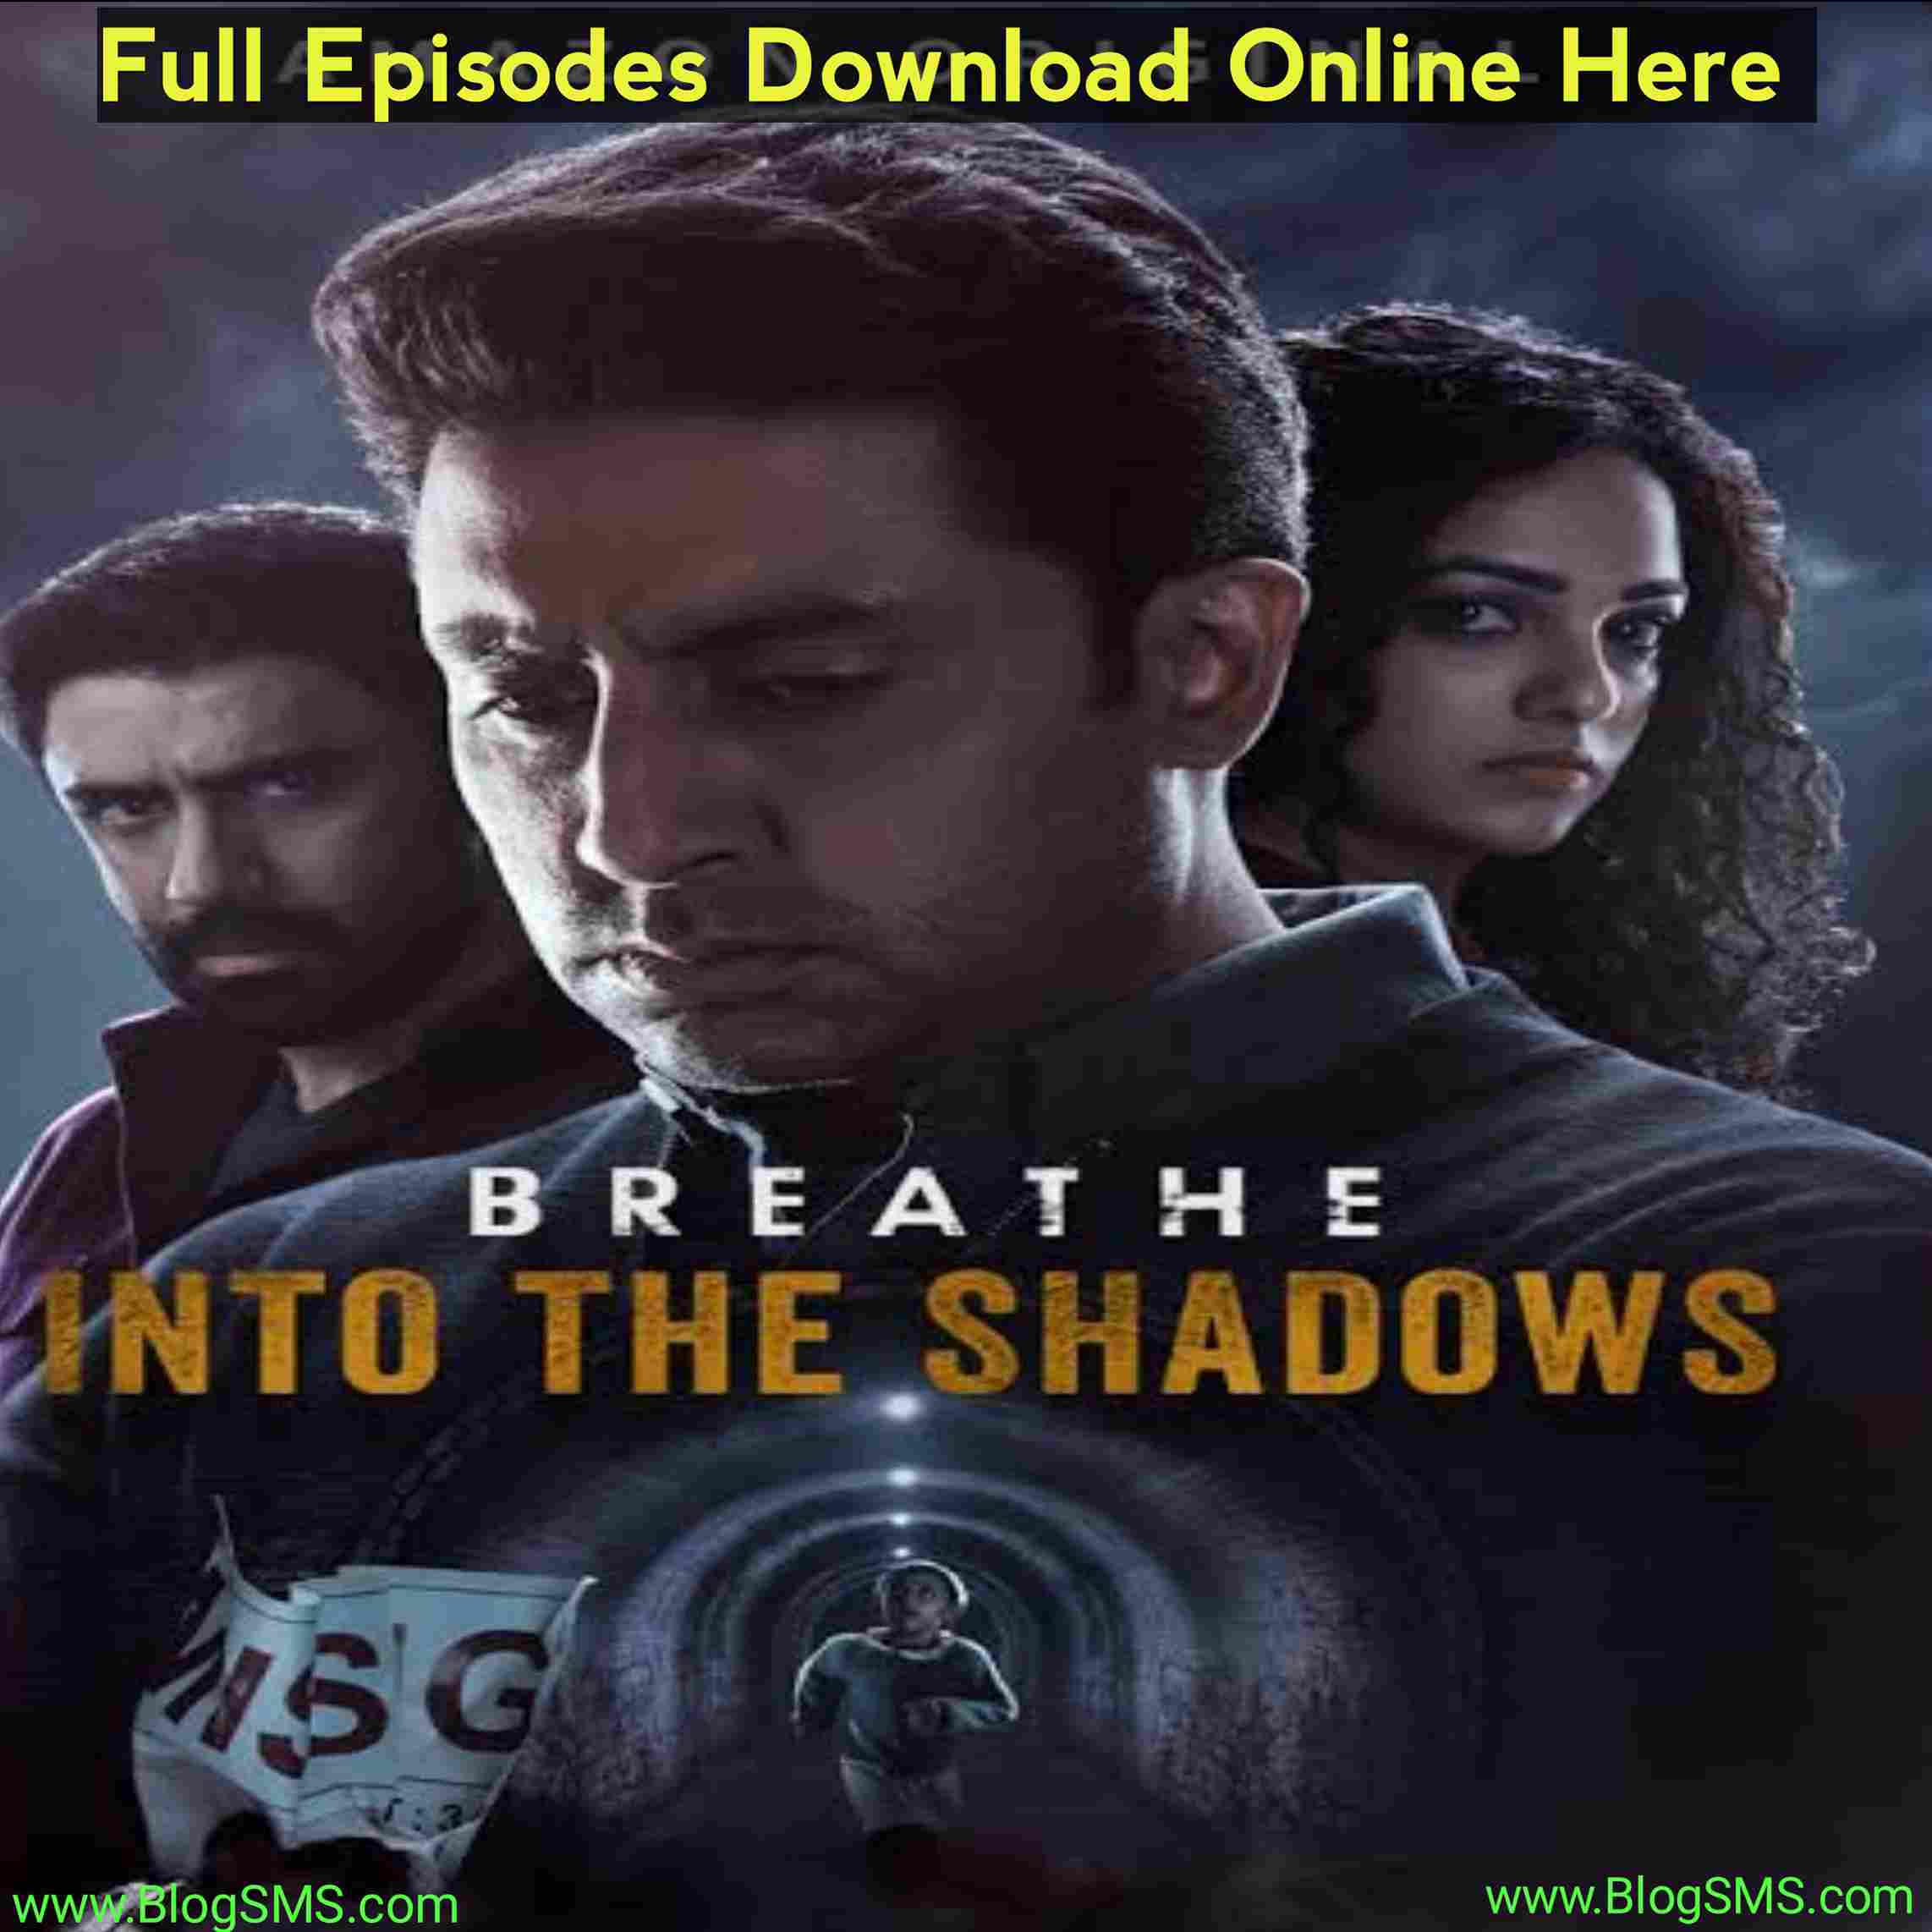 Breathe Into the Shadows Season 2 Download Available on Filmyzilla, Tamilrockers and other Torrent Websites